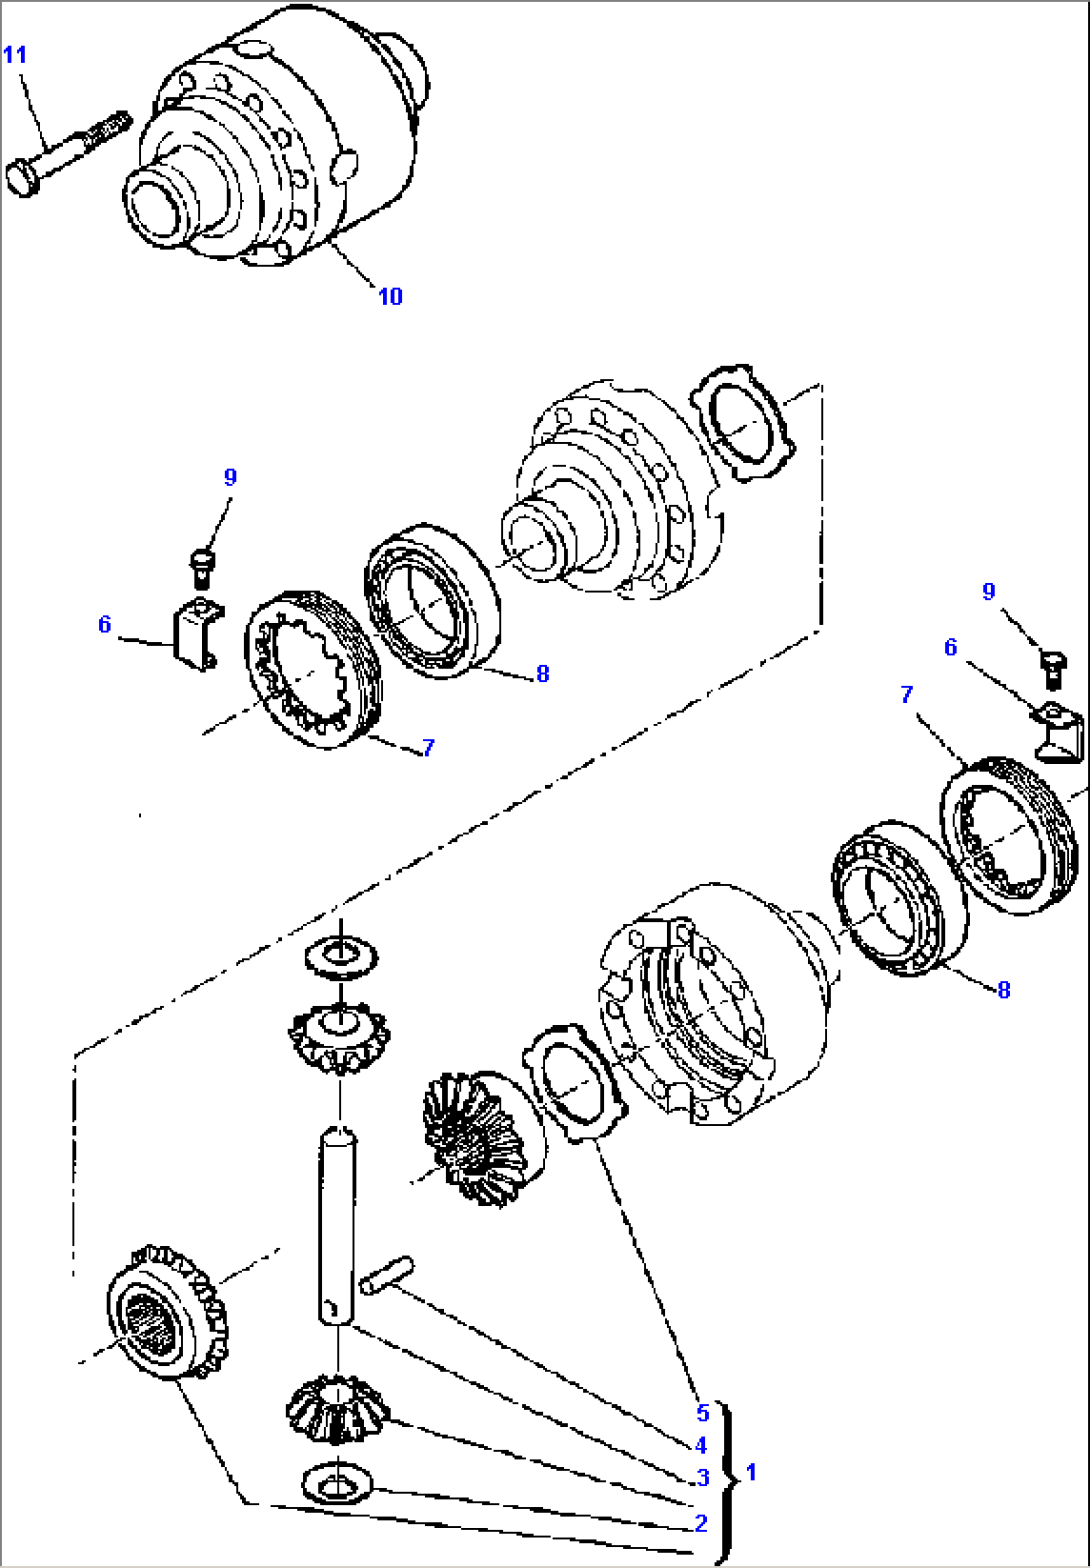 FIG. F3415-02A0 FRONT AXLE - DIFFERENTIAL